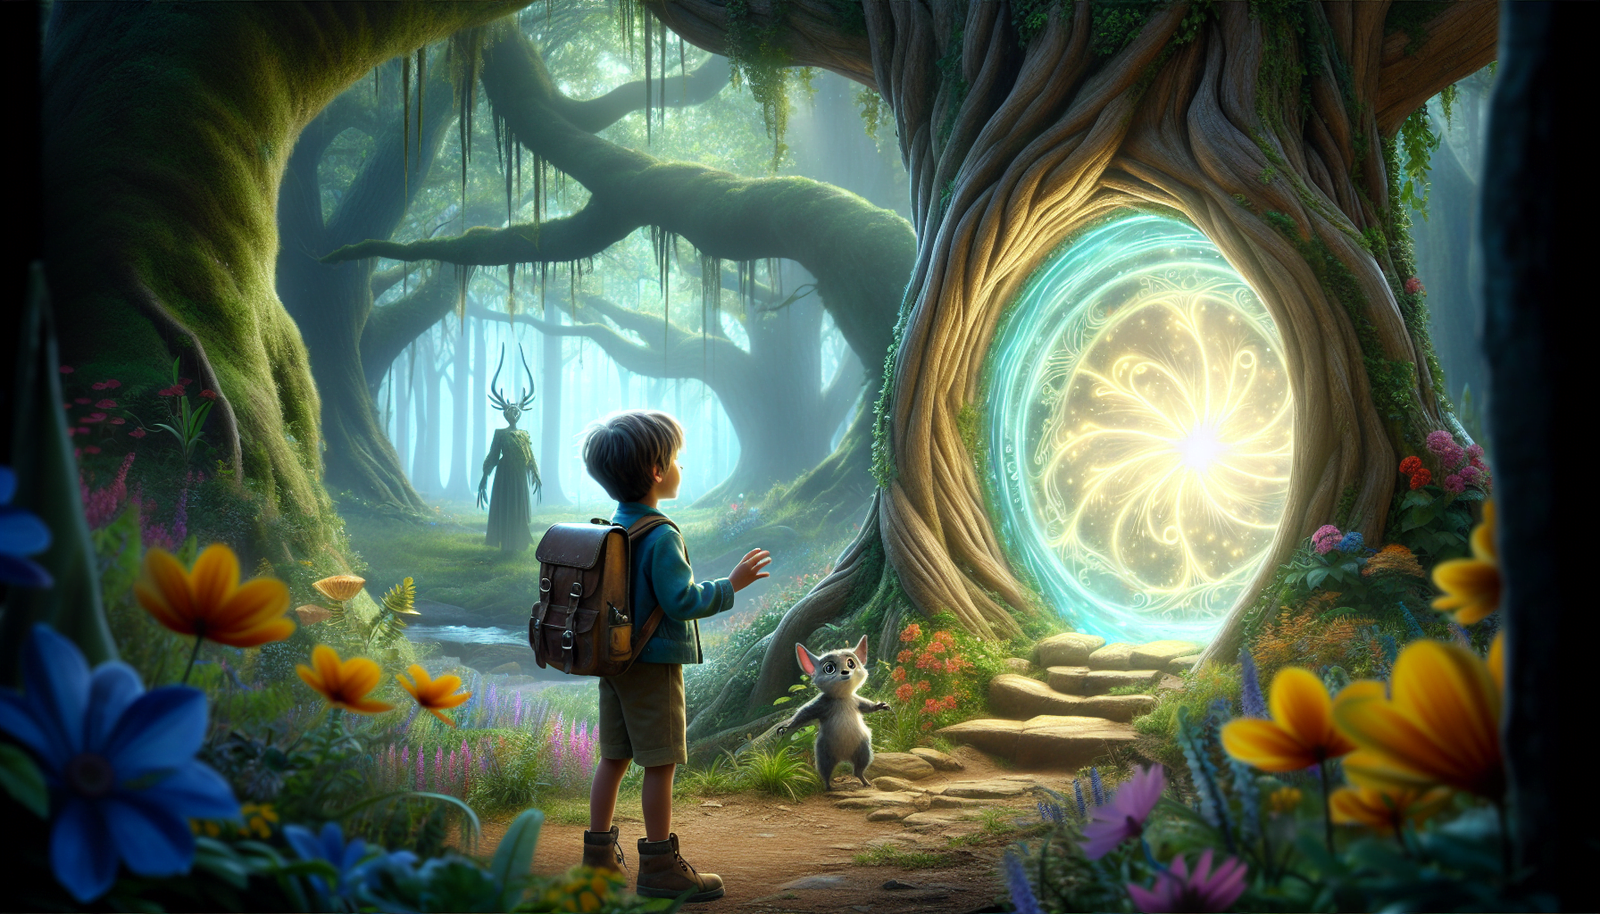 A young boy wearing a backpack stands in a magical forest looking into a tree-portal.